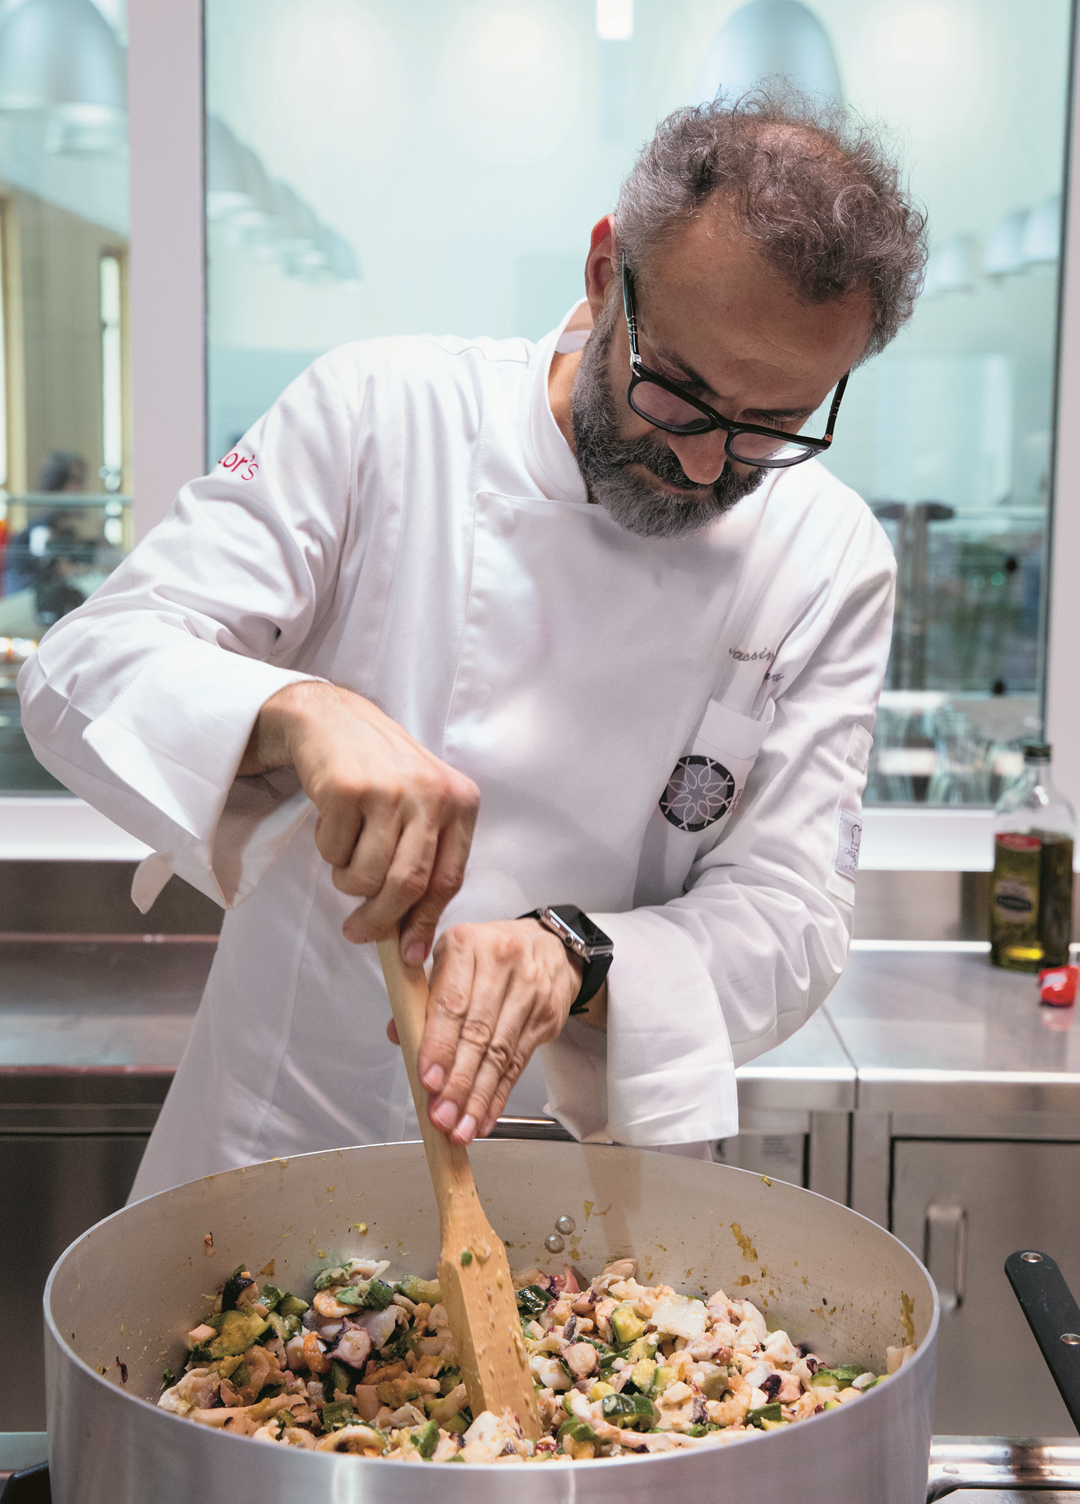 Massimo Bottura at Refettorio Ambrosiano, Milan, photographed by Emanuele Colombo